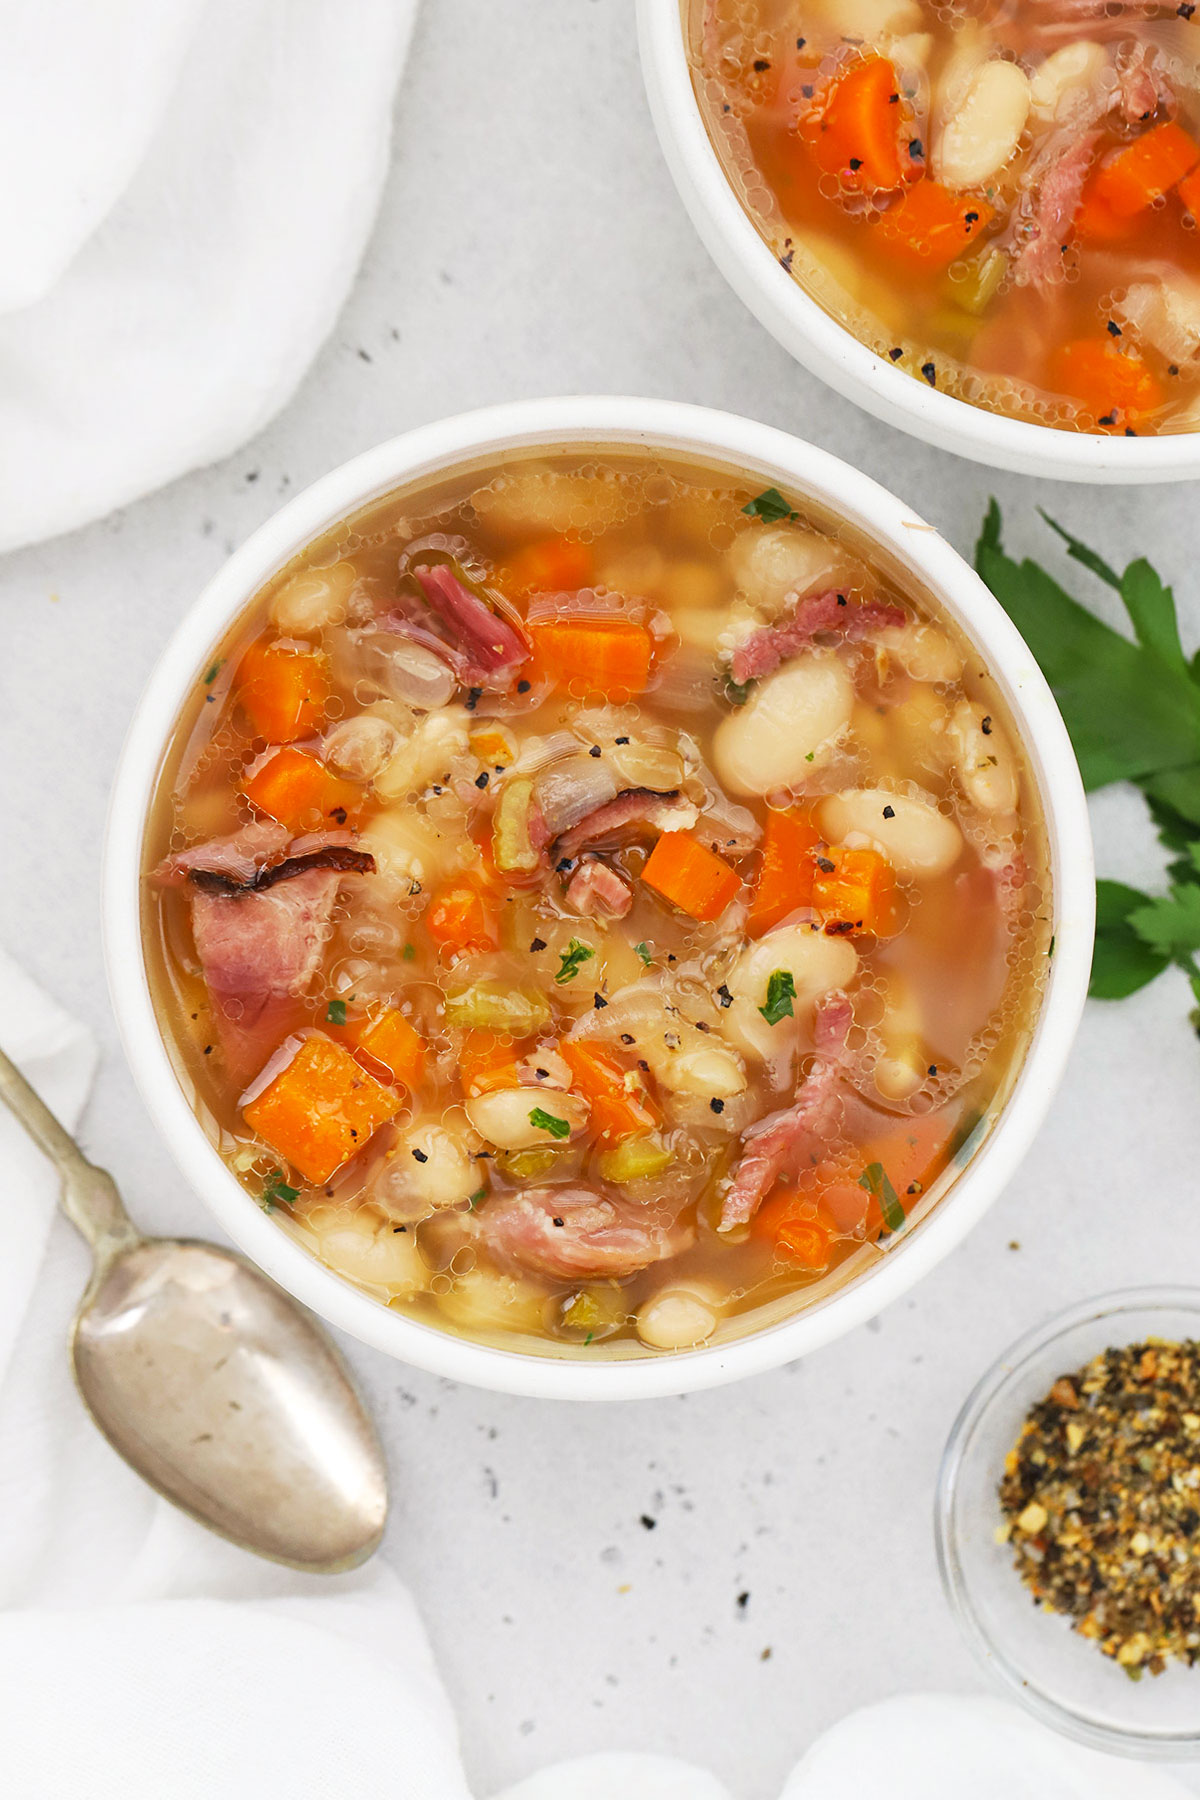 two bowls of slow cooker ham and bean soup on a white background